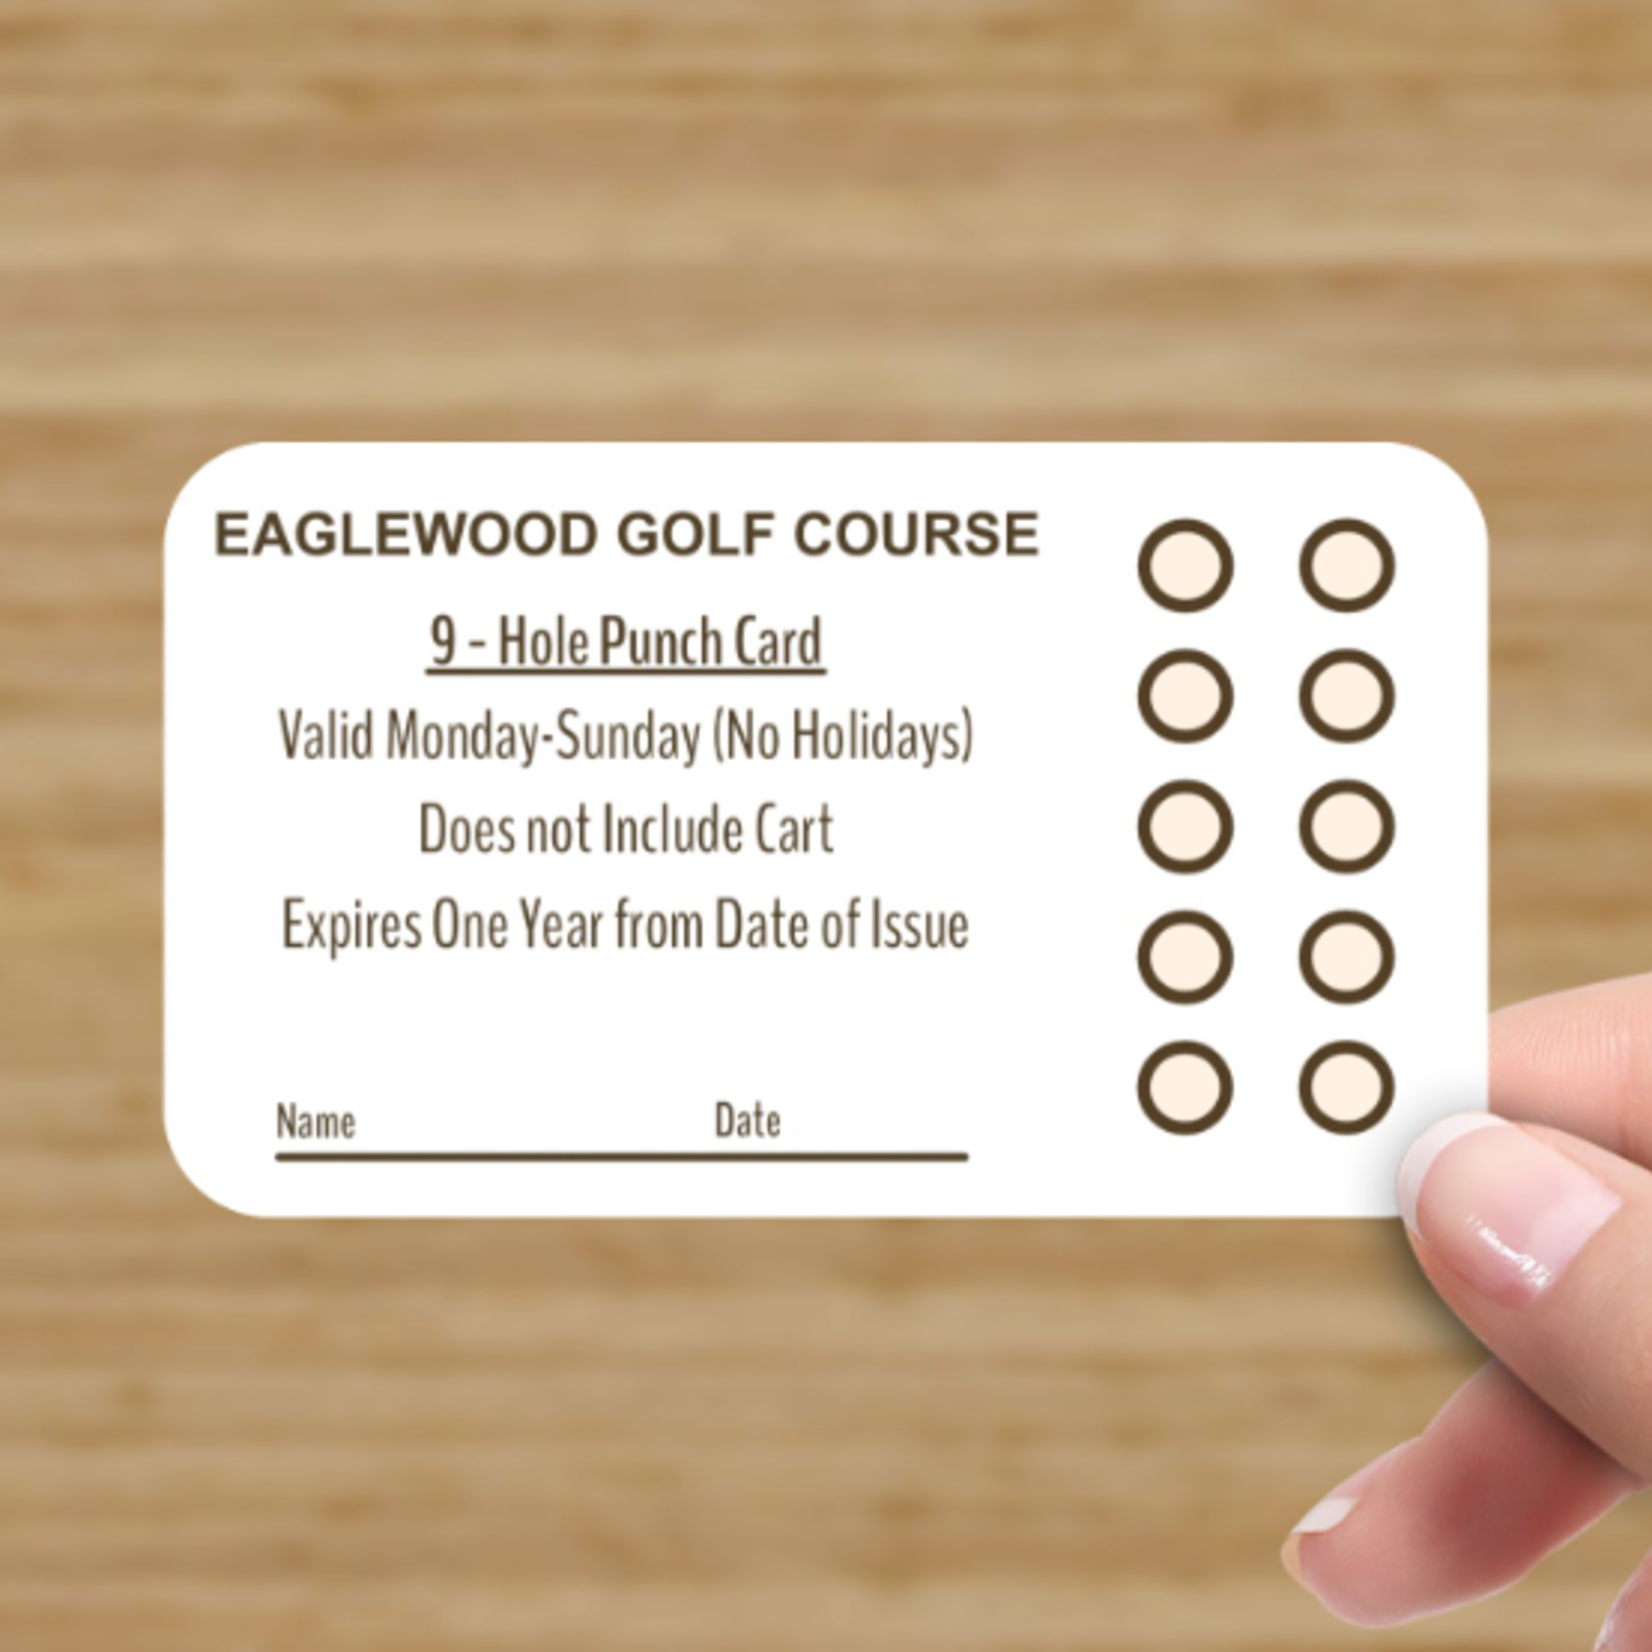 9 Holes - Punch Card (Green Fee)